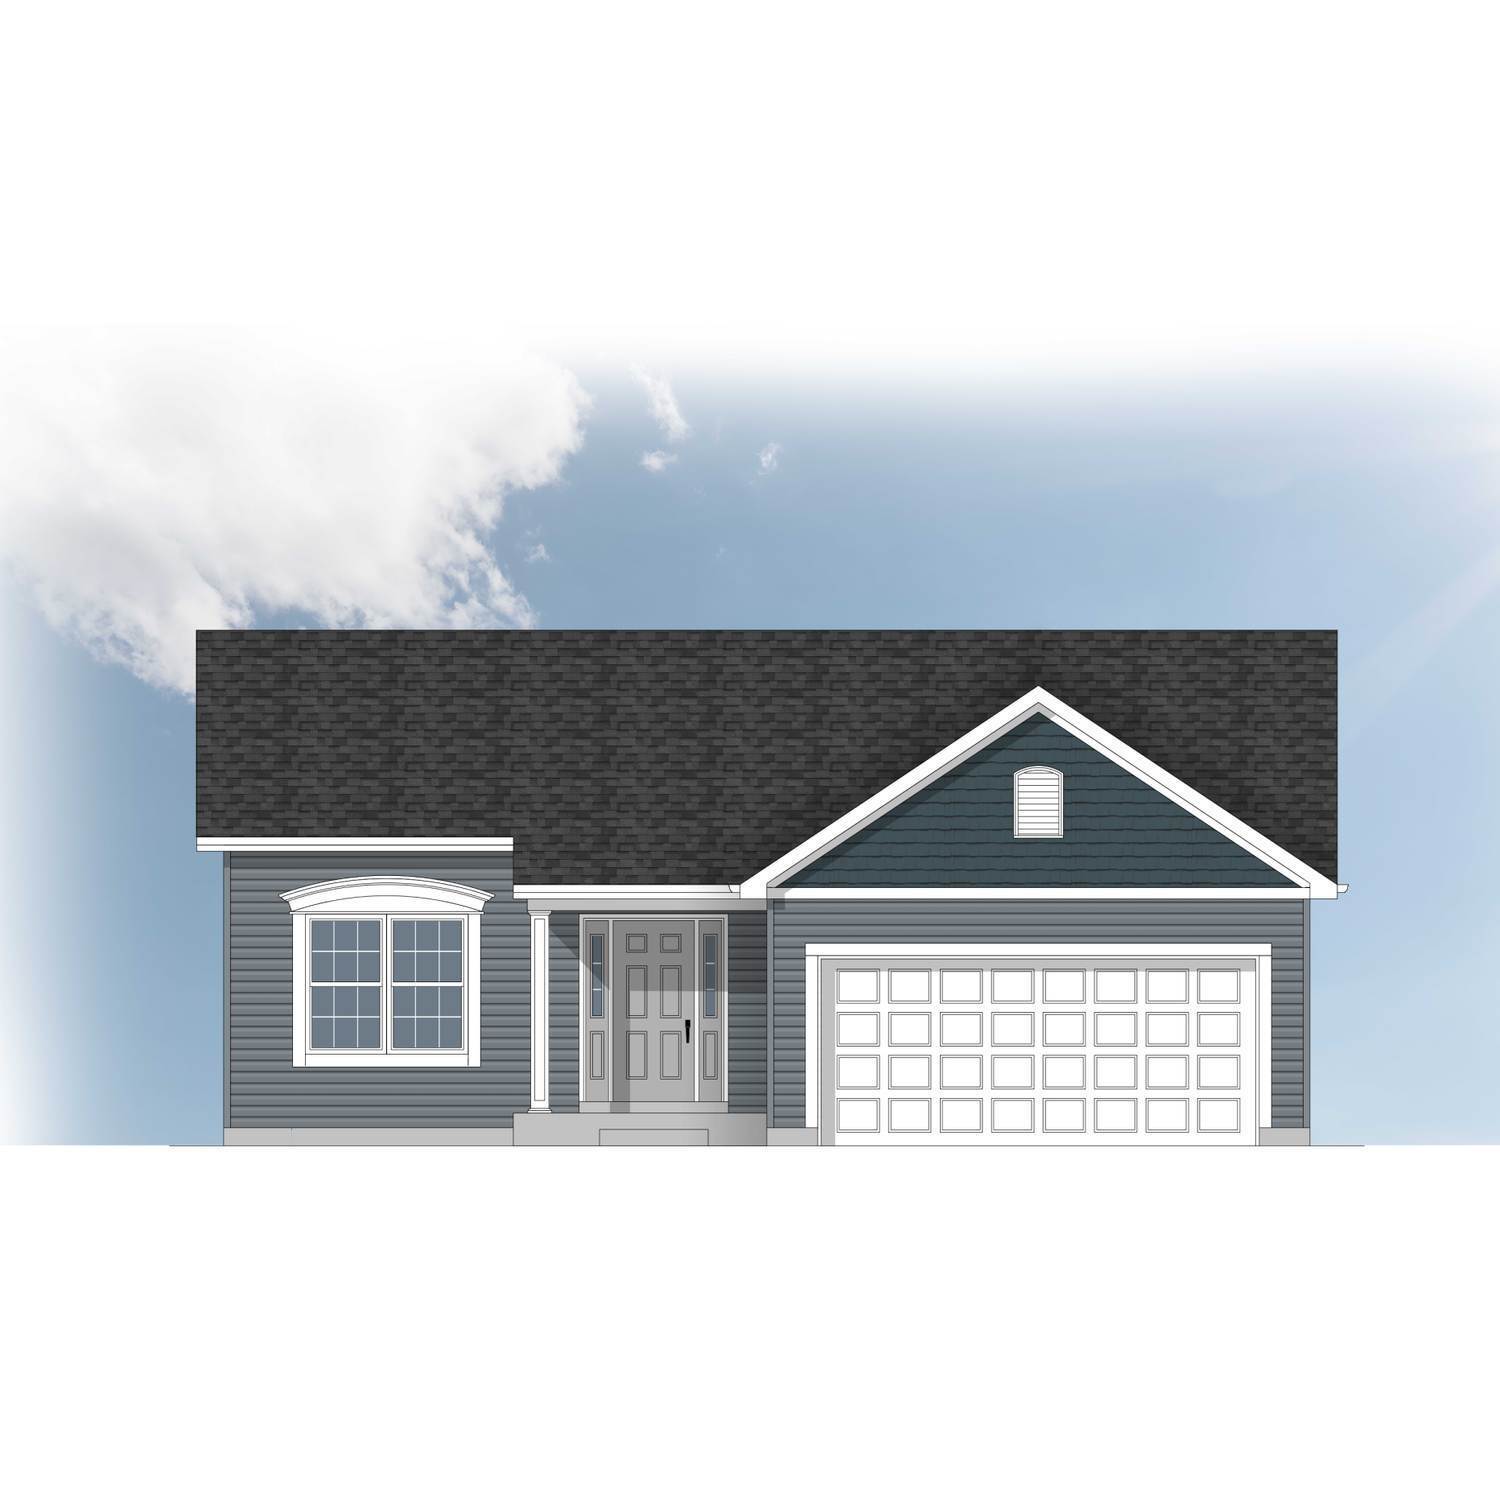 Single Family for Sale at Moscow Mills, MO 63362